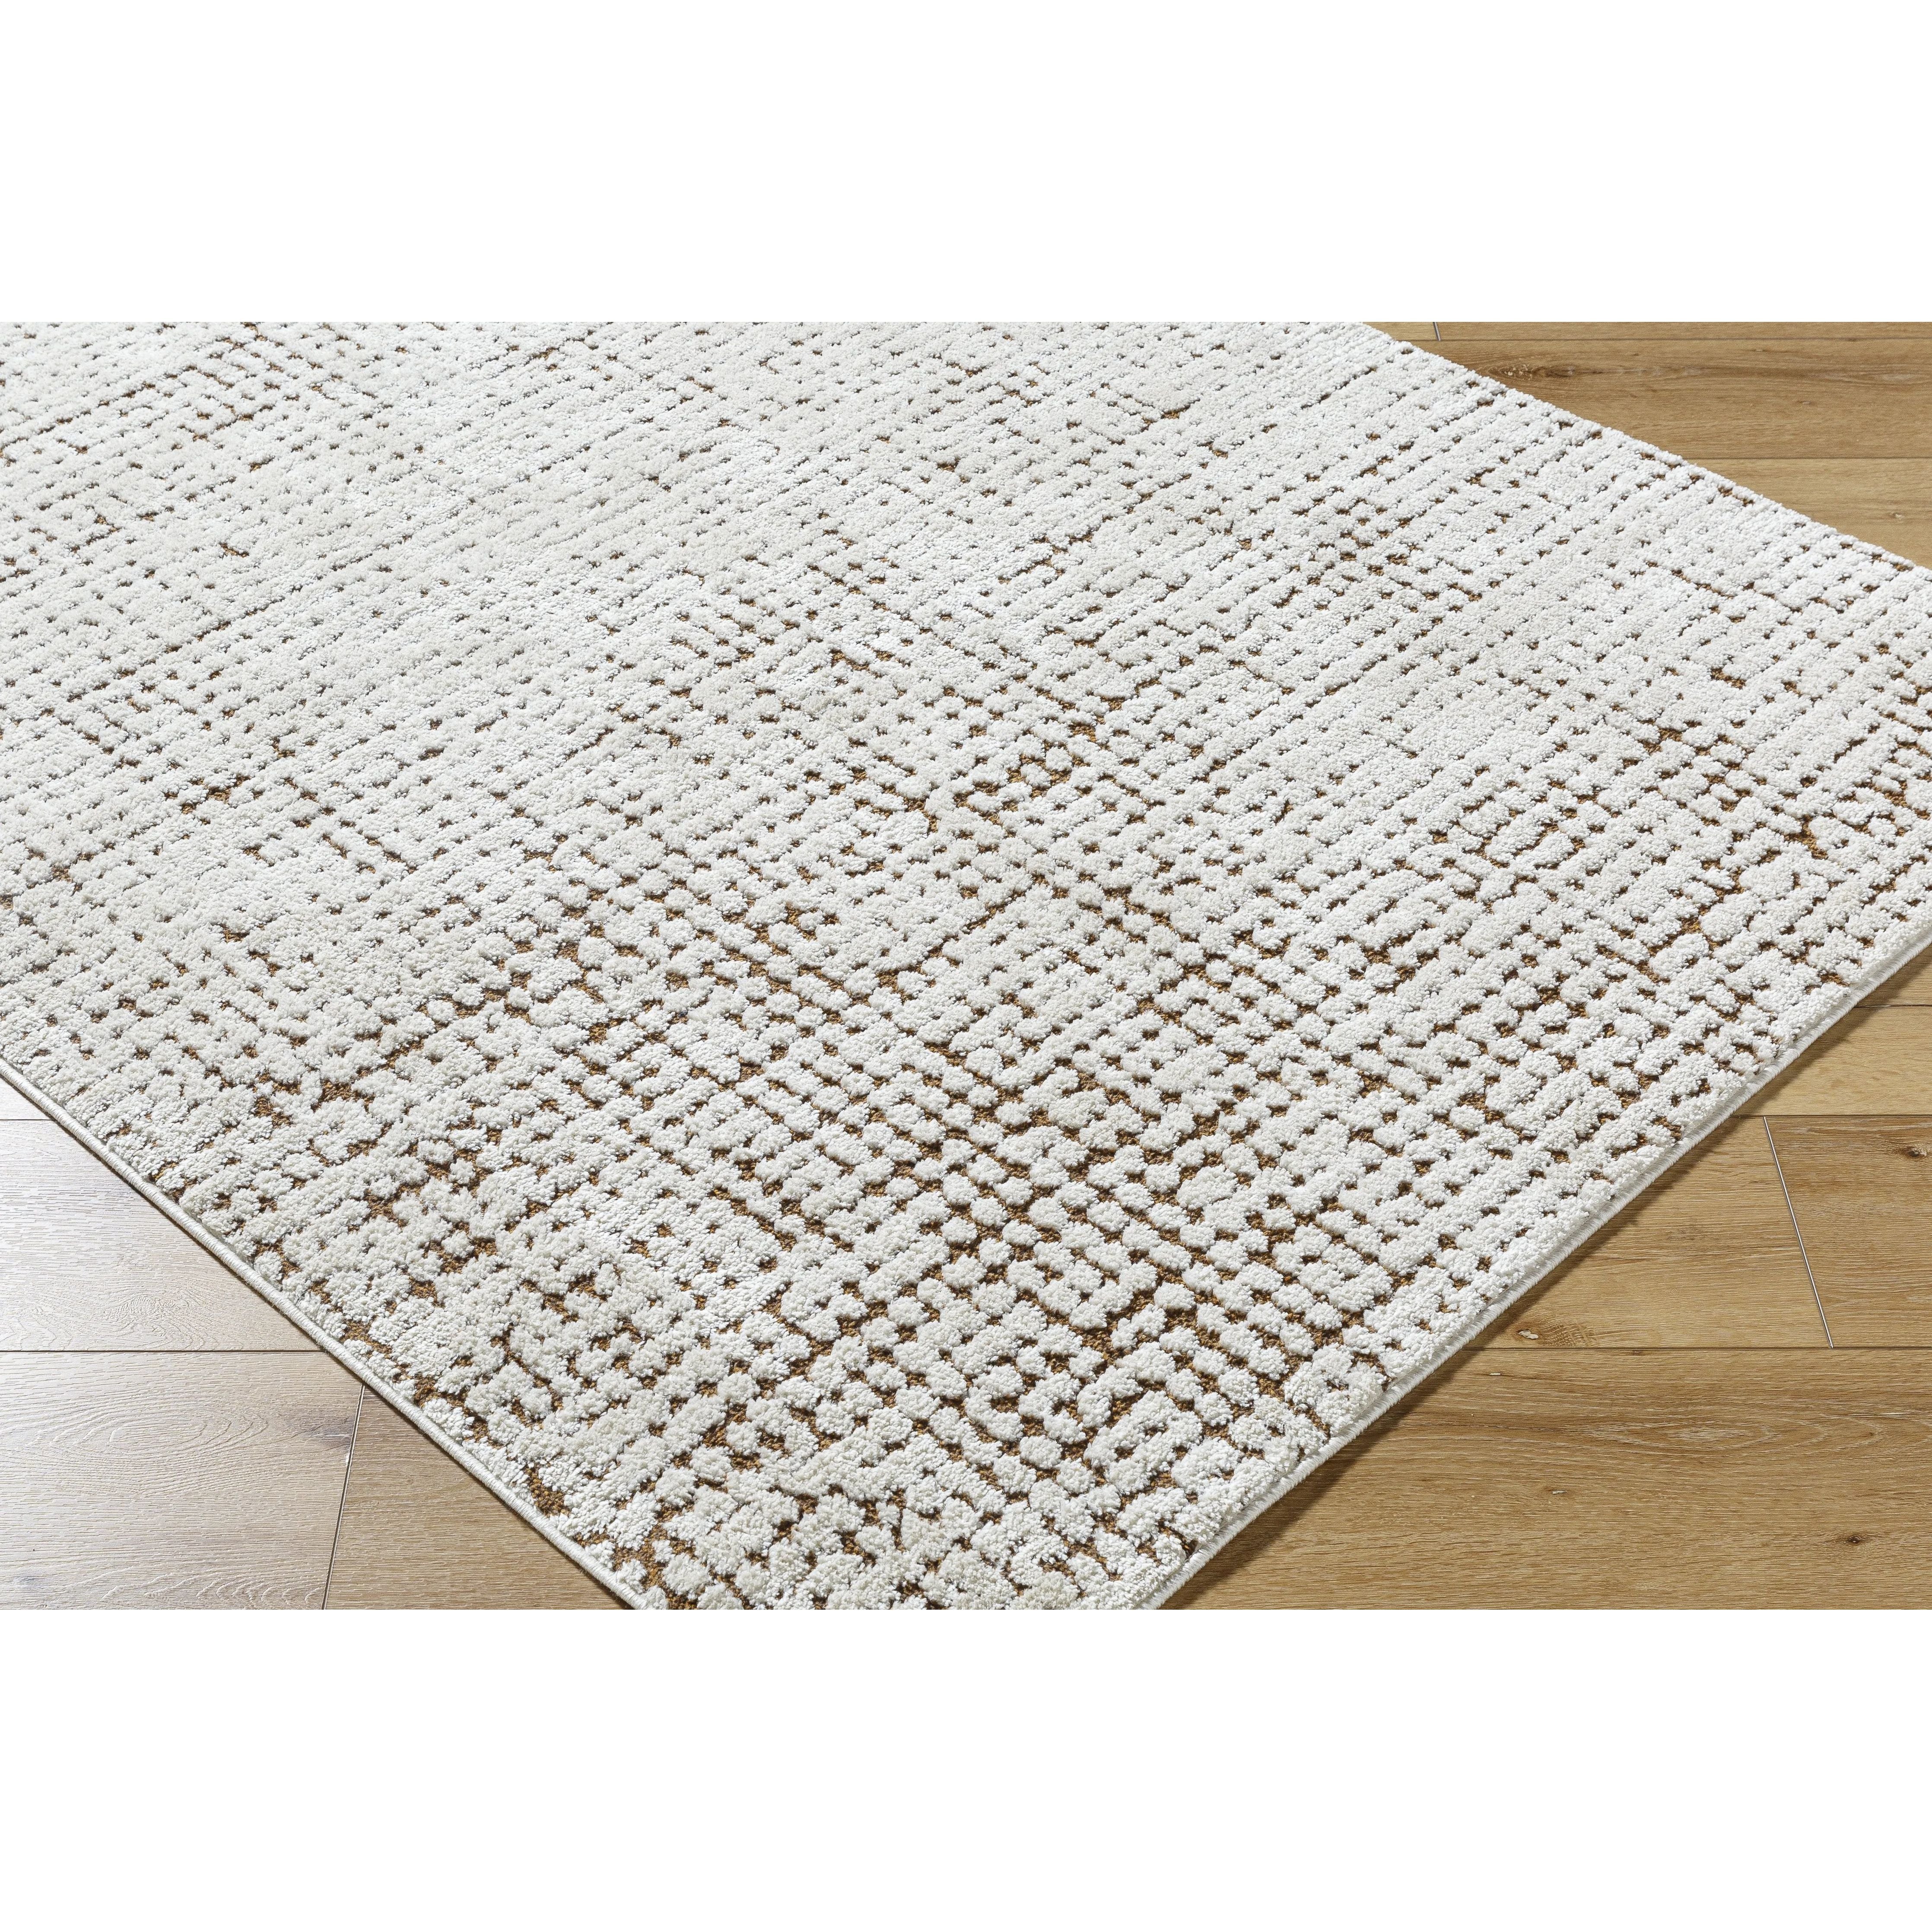 PNW Home x Surya available at Amethyst Home shipping to Australia, UK, and Canada. Organic modern design with easy to clean rugs for a family home in  the Salt Lake City metro area.